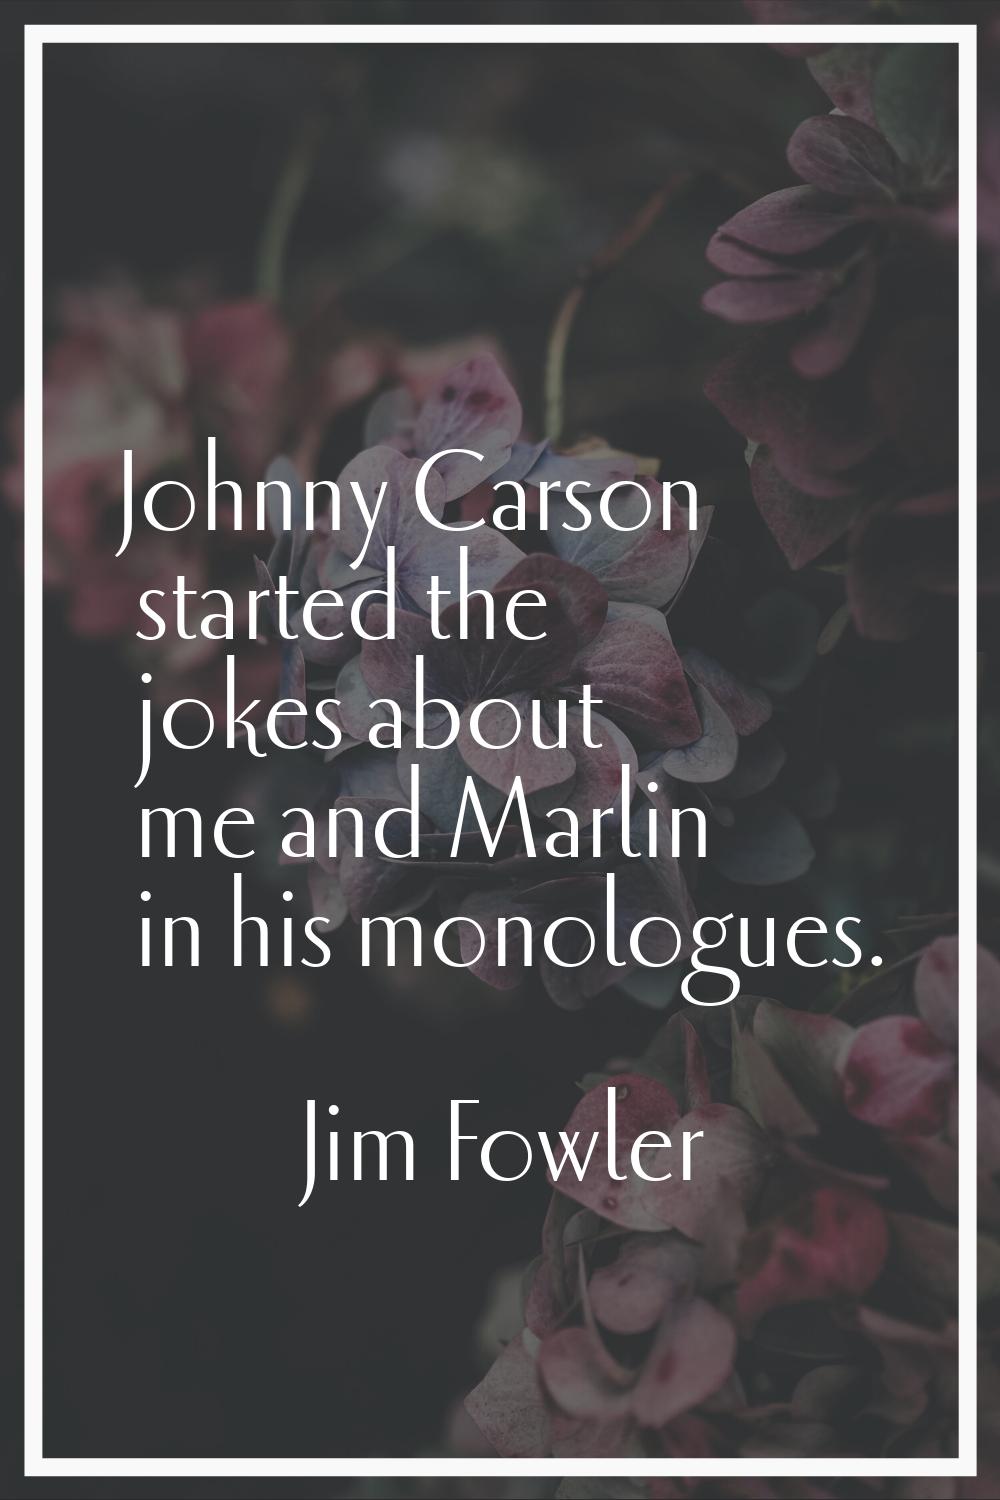 Johnny Carson started the jokes about me and Marlin in his monologues.